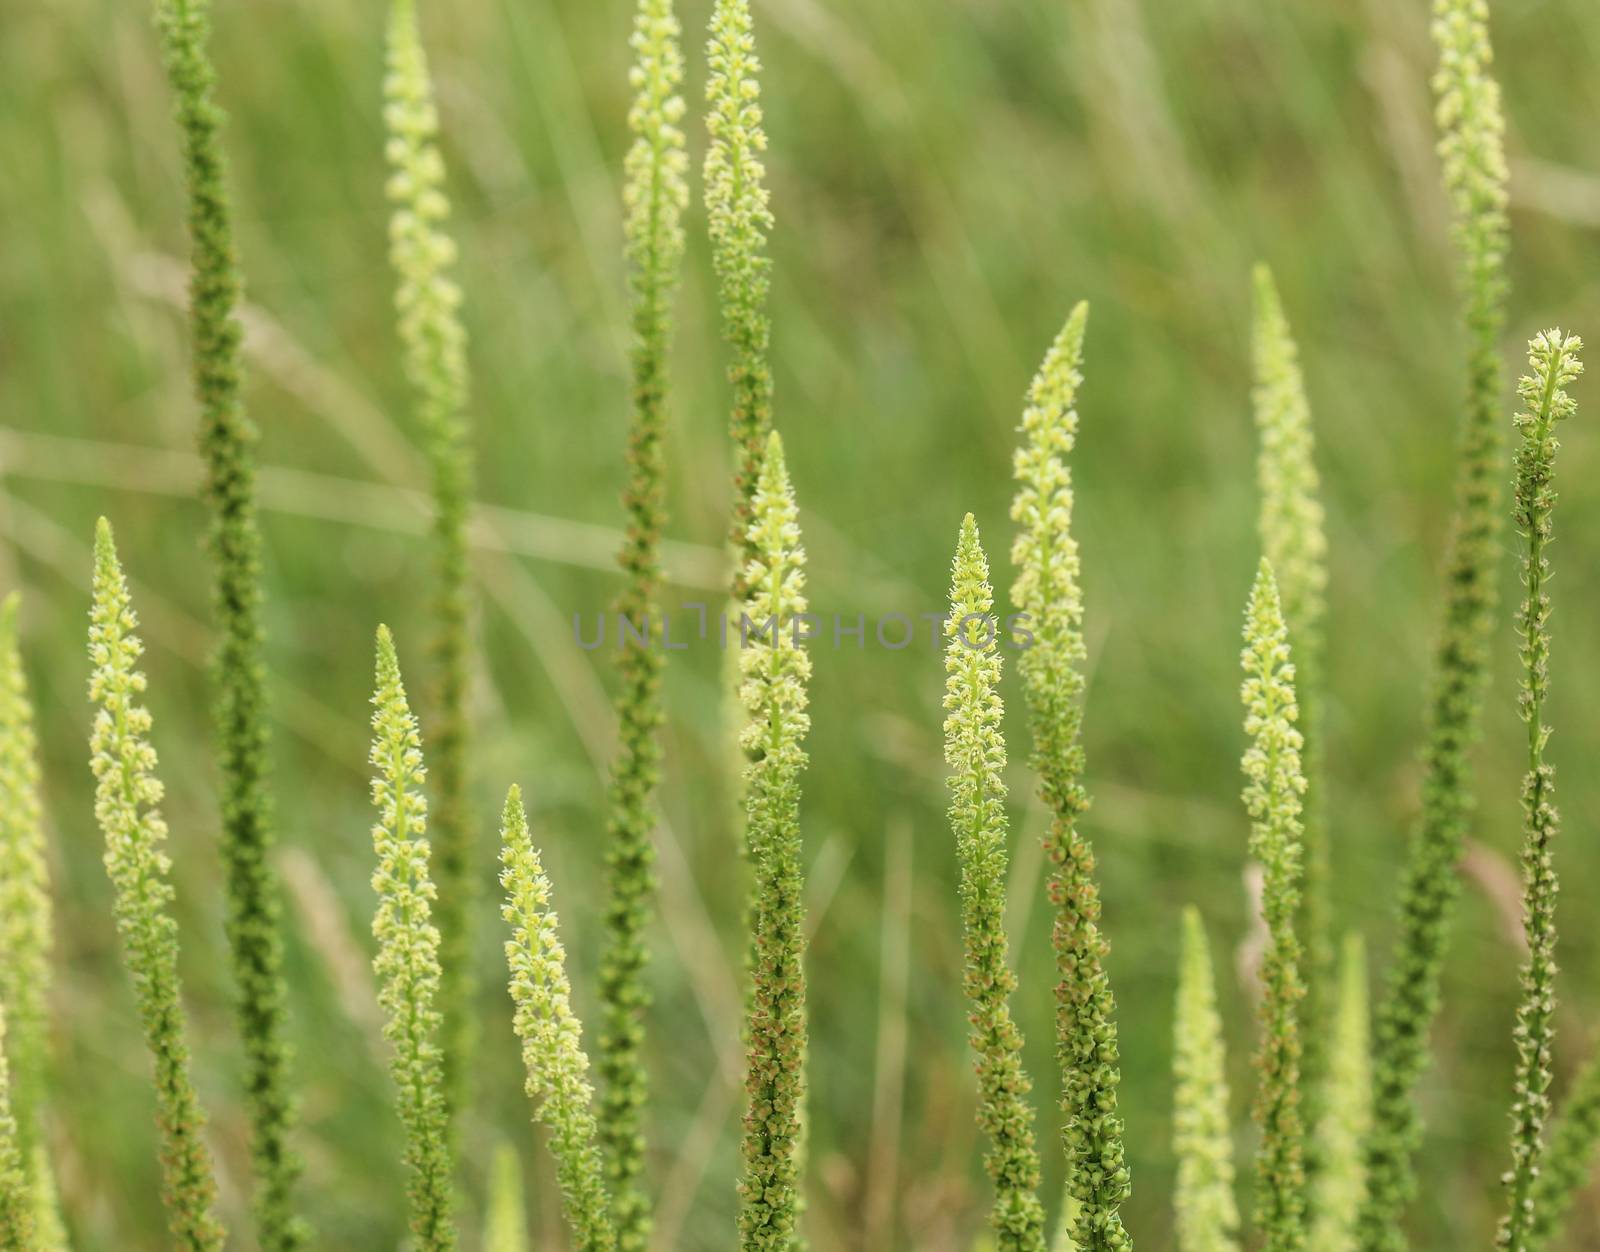 close up of Reseda luteola, known as dyer's rocket, dyer's weed, weld, woold, and yellow weed